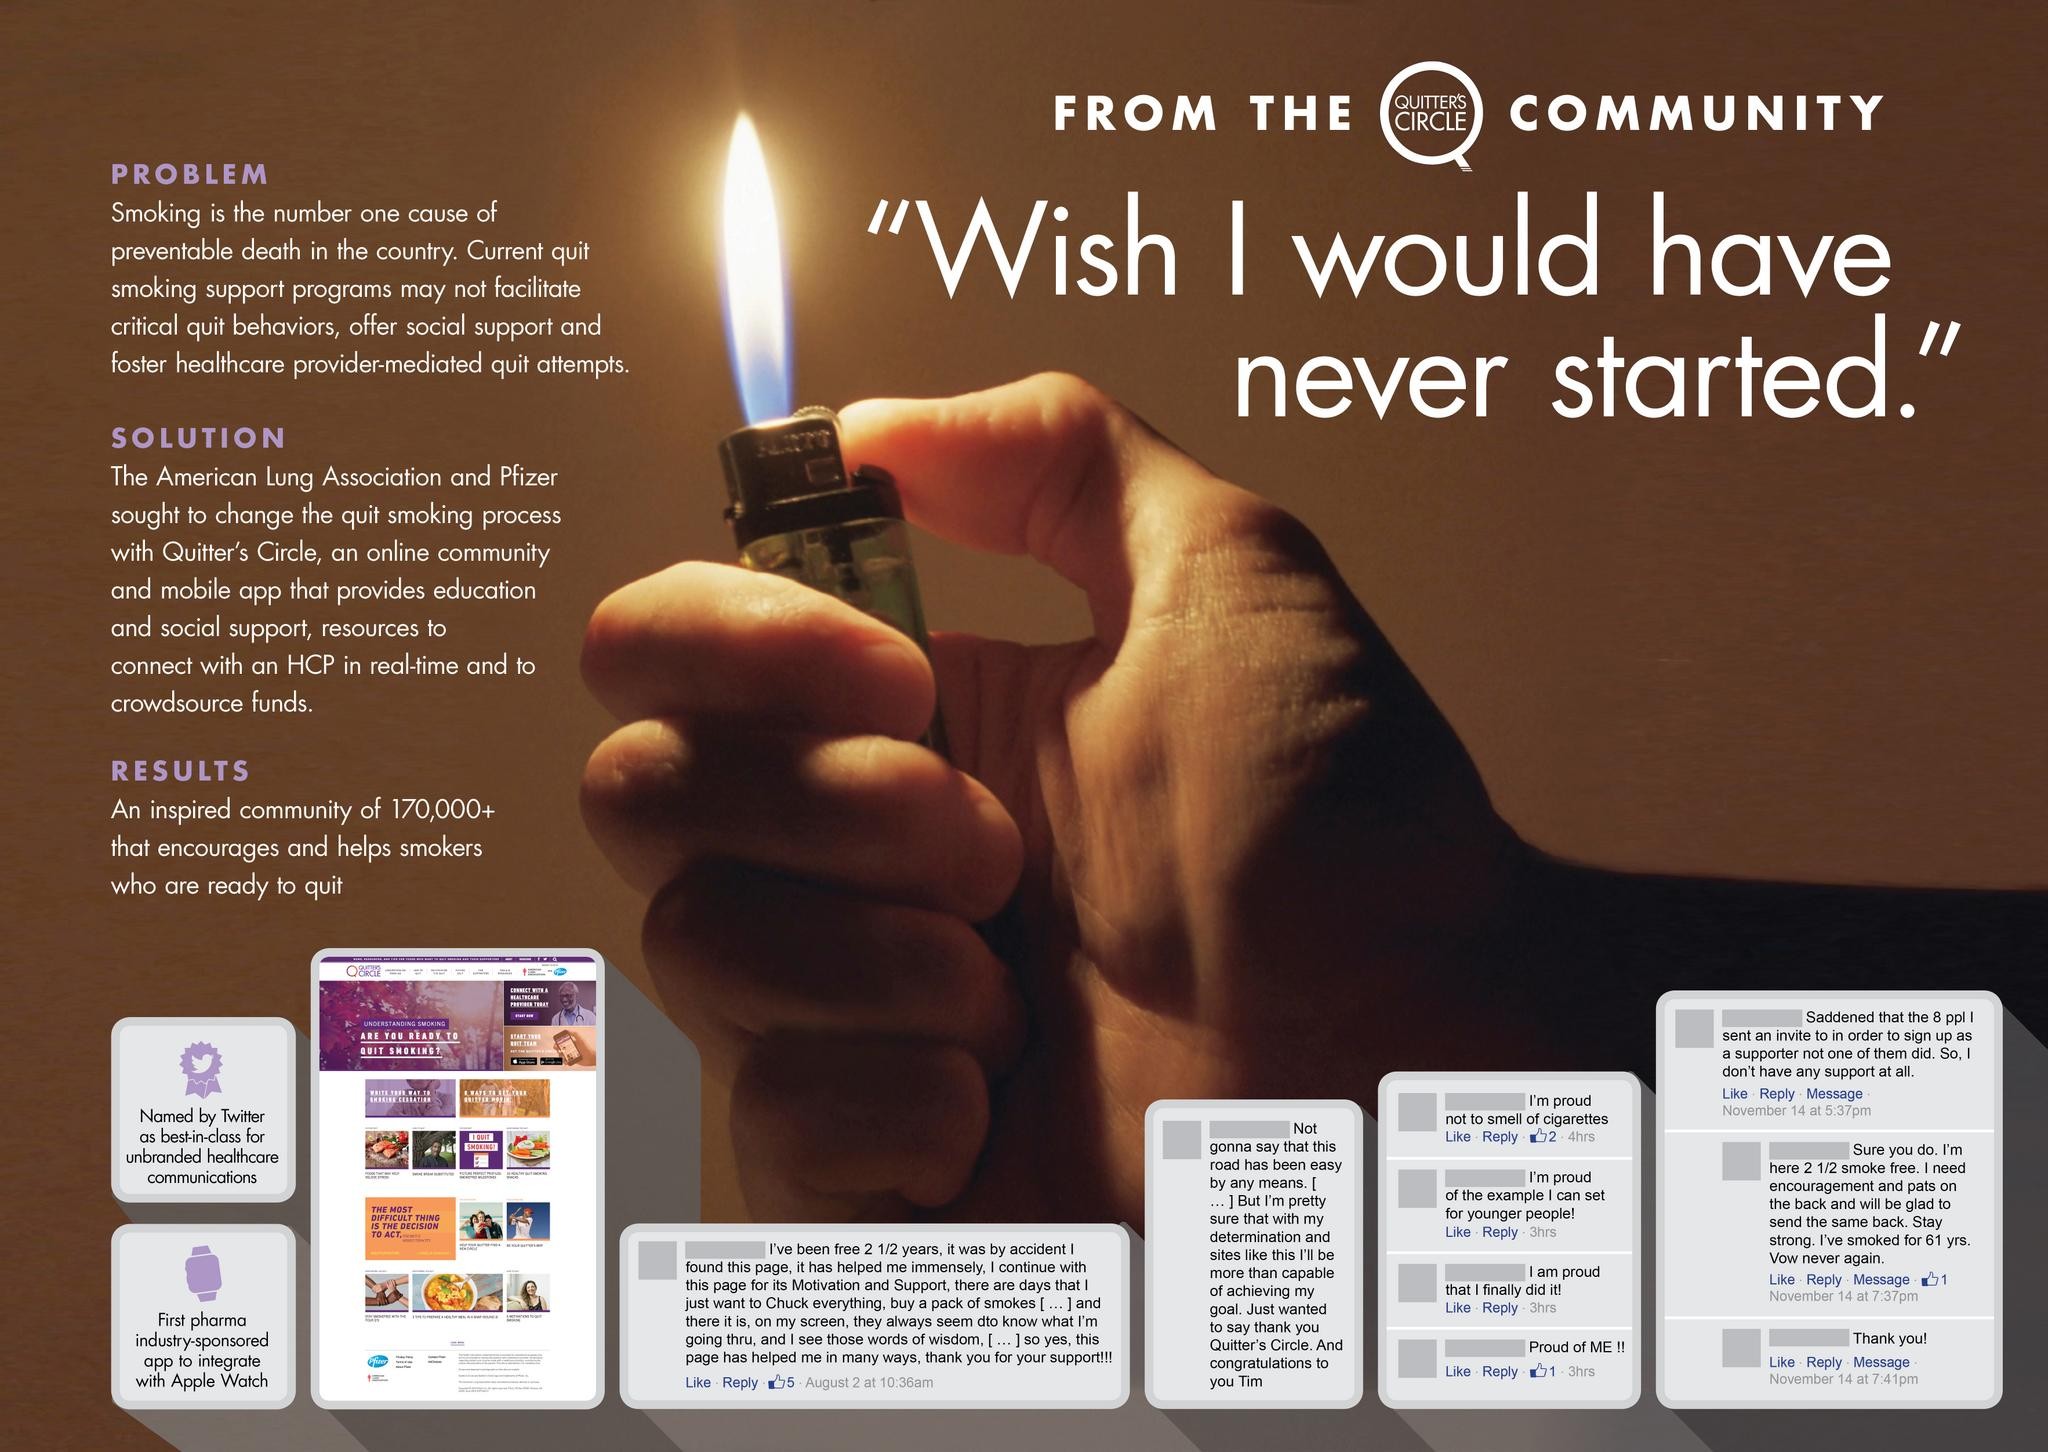 Helping Smokers "Click to Quit" with Quitter's Circle